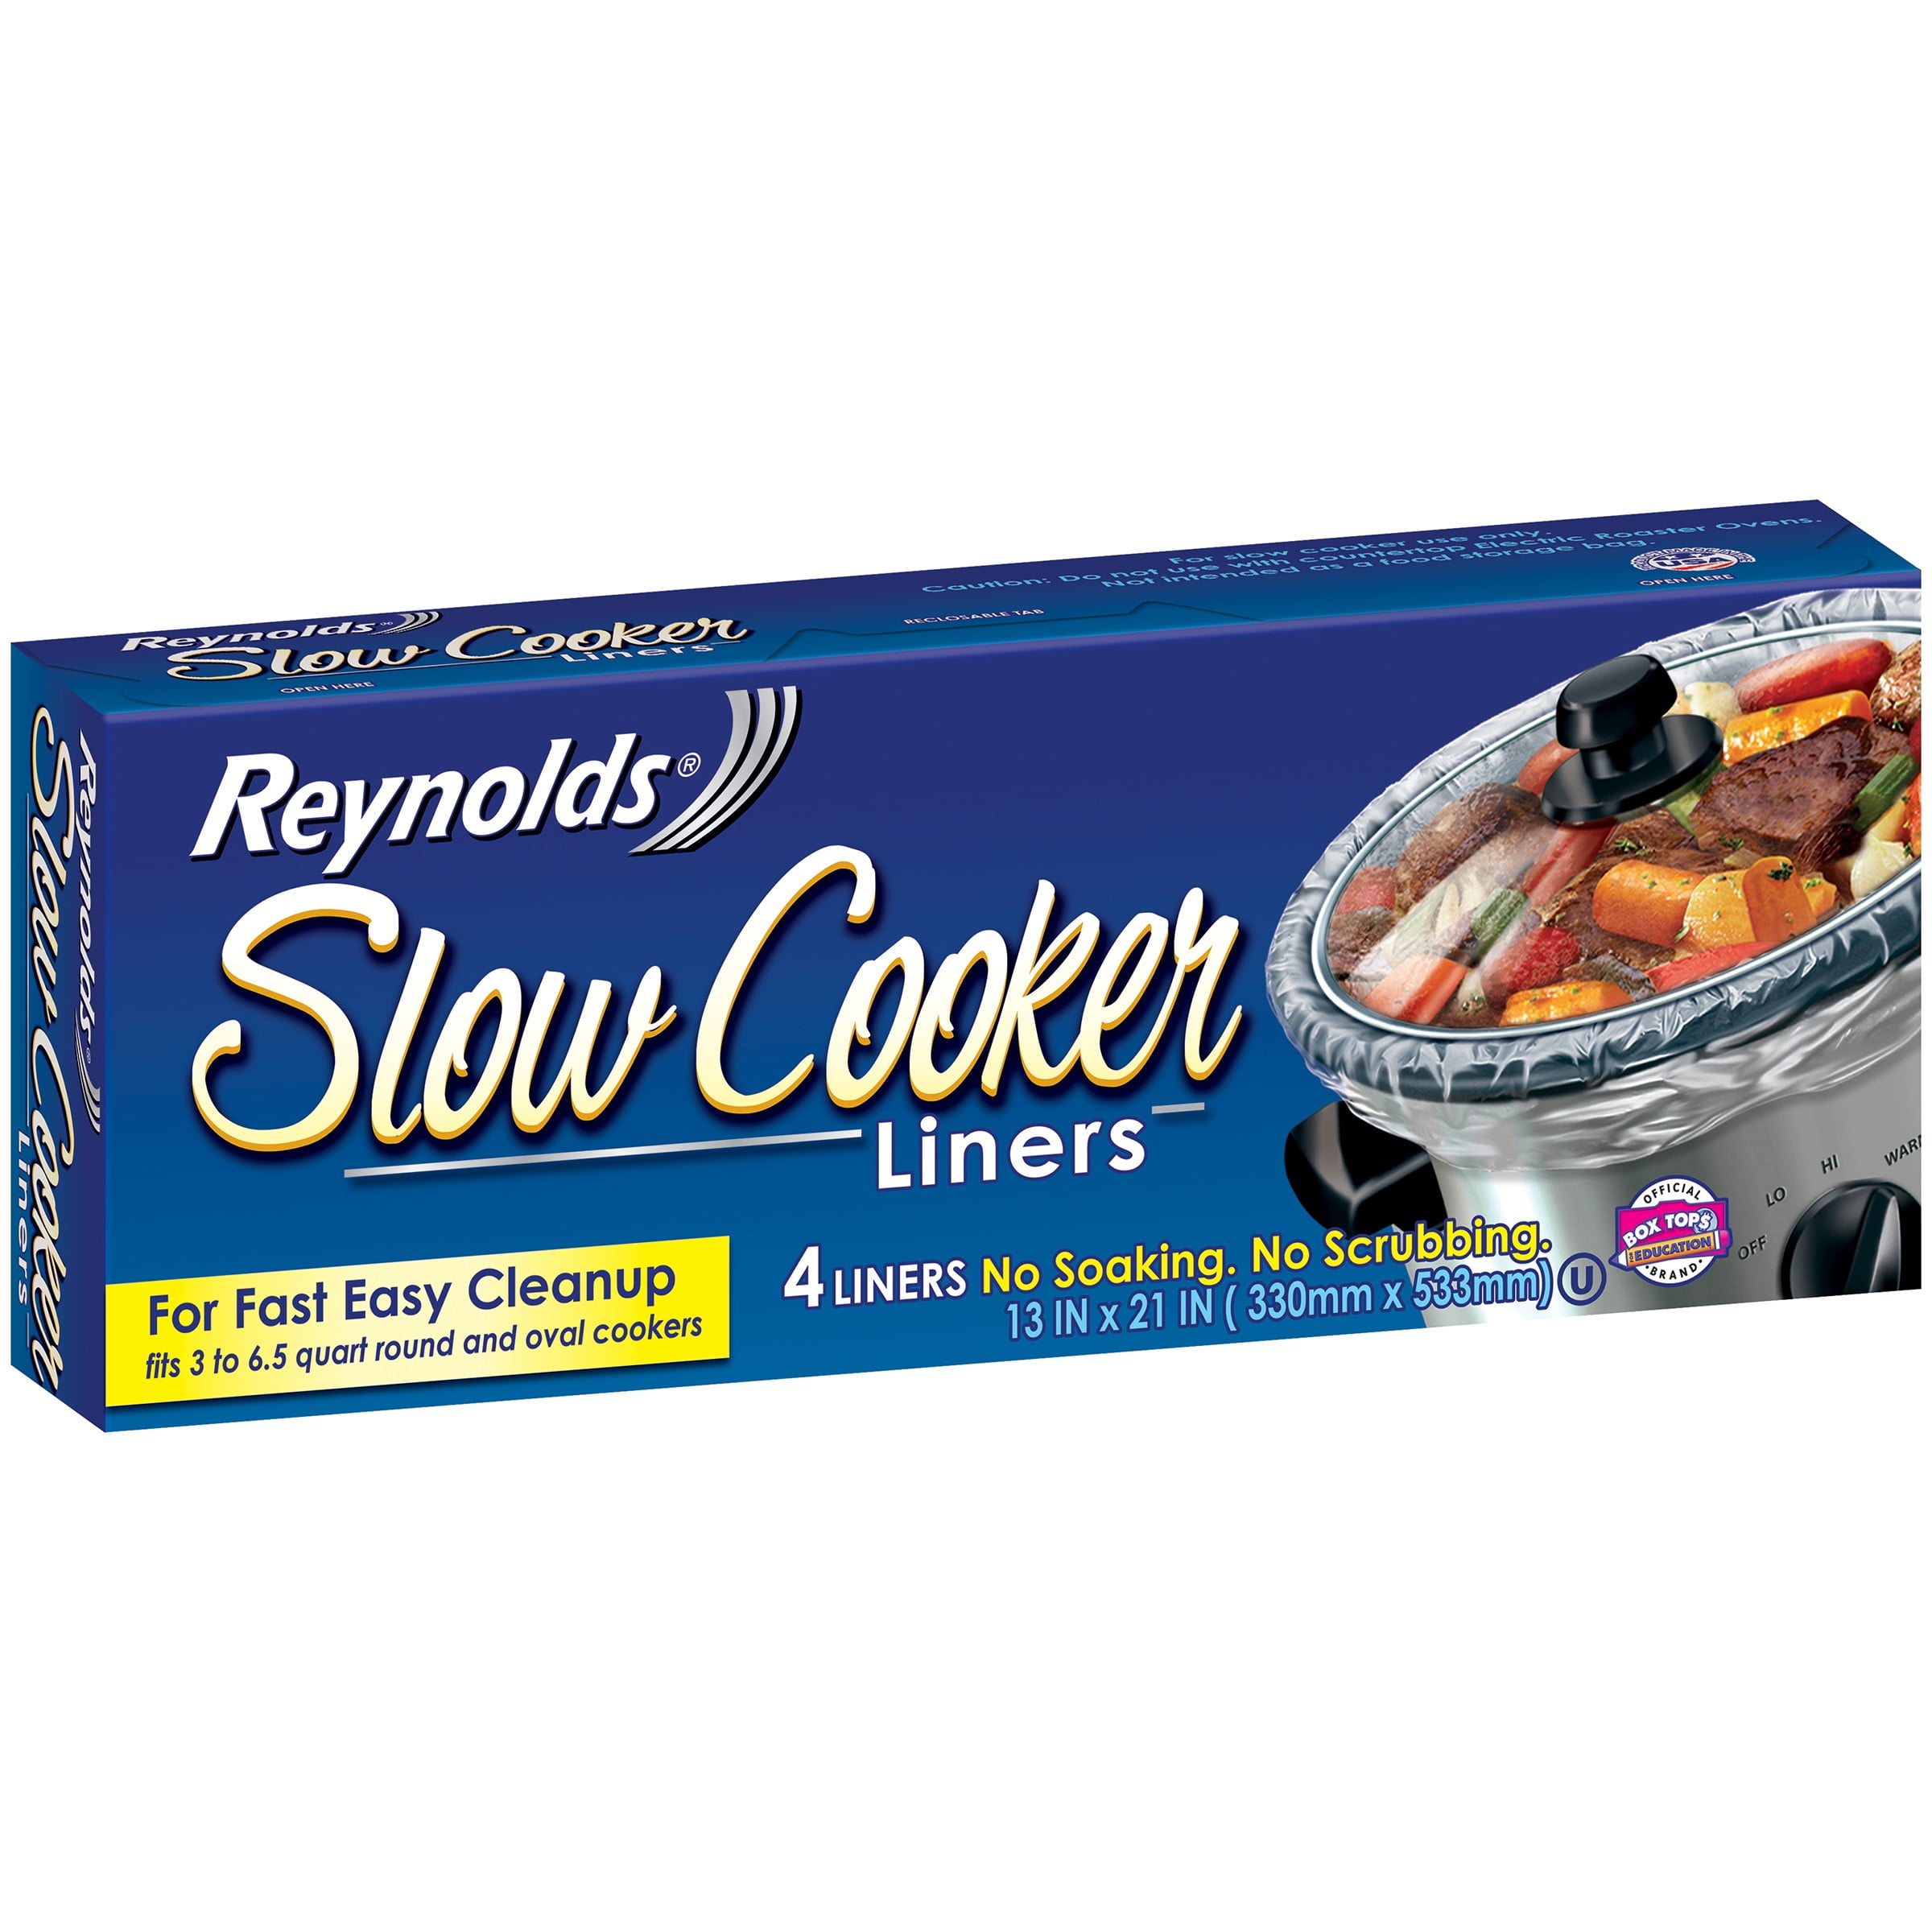 Reynolds 6135883 3-6.5 Qt Slow Cooker Liners 13 X 21 In.